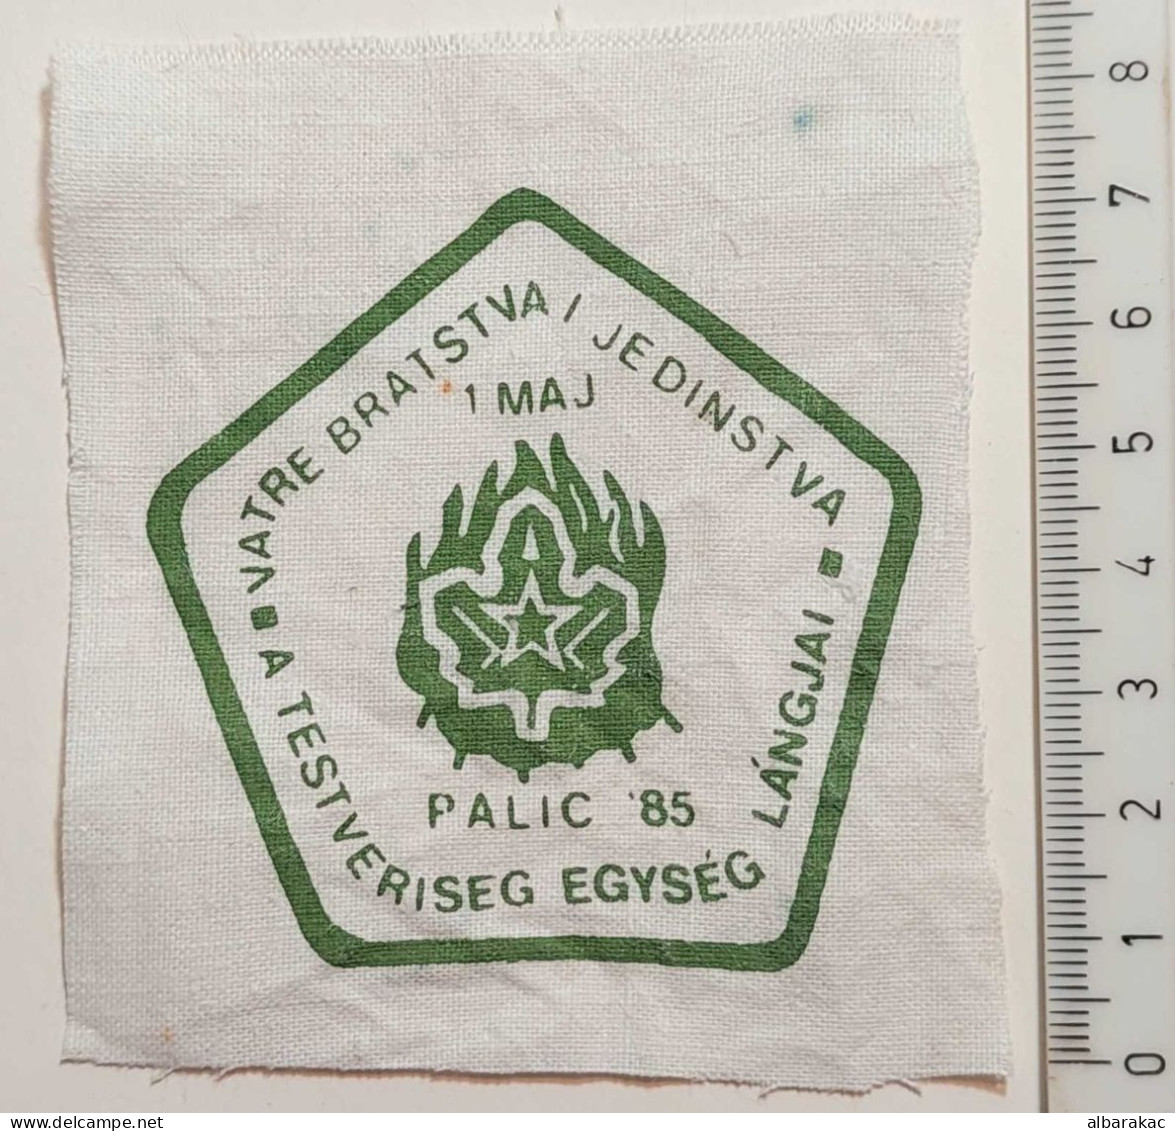 Serbia , Boy Scout Patches - The Fire Of Brotherhood And Unity - Palic 1985 1. Maj - Scouting